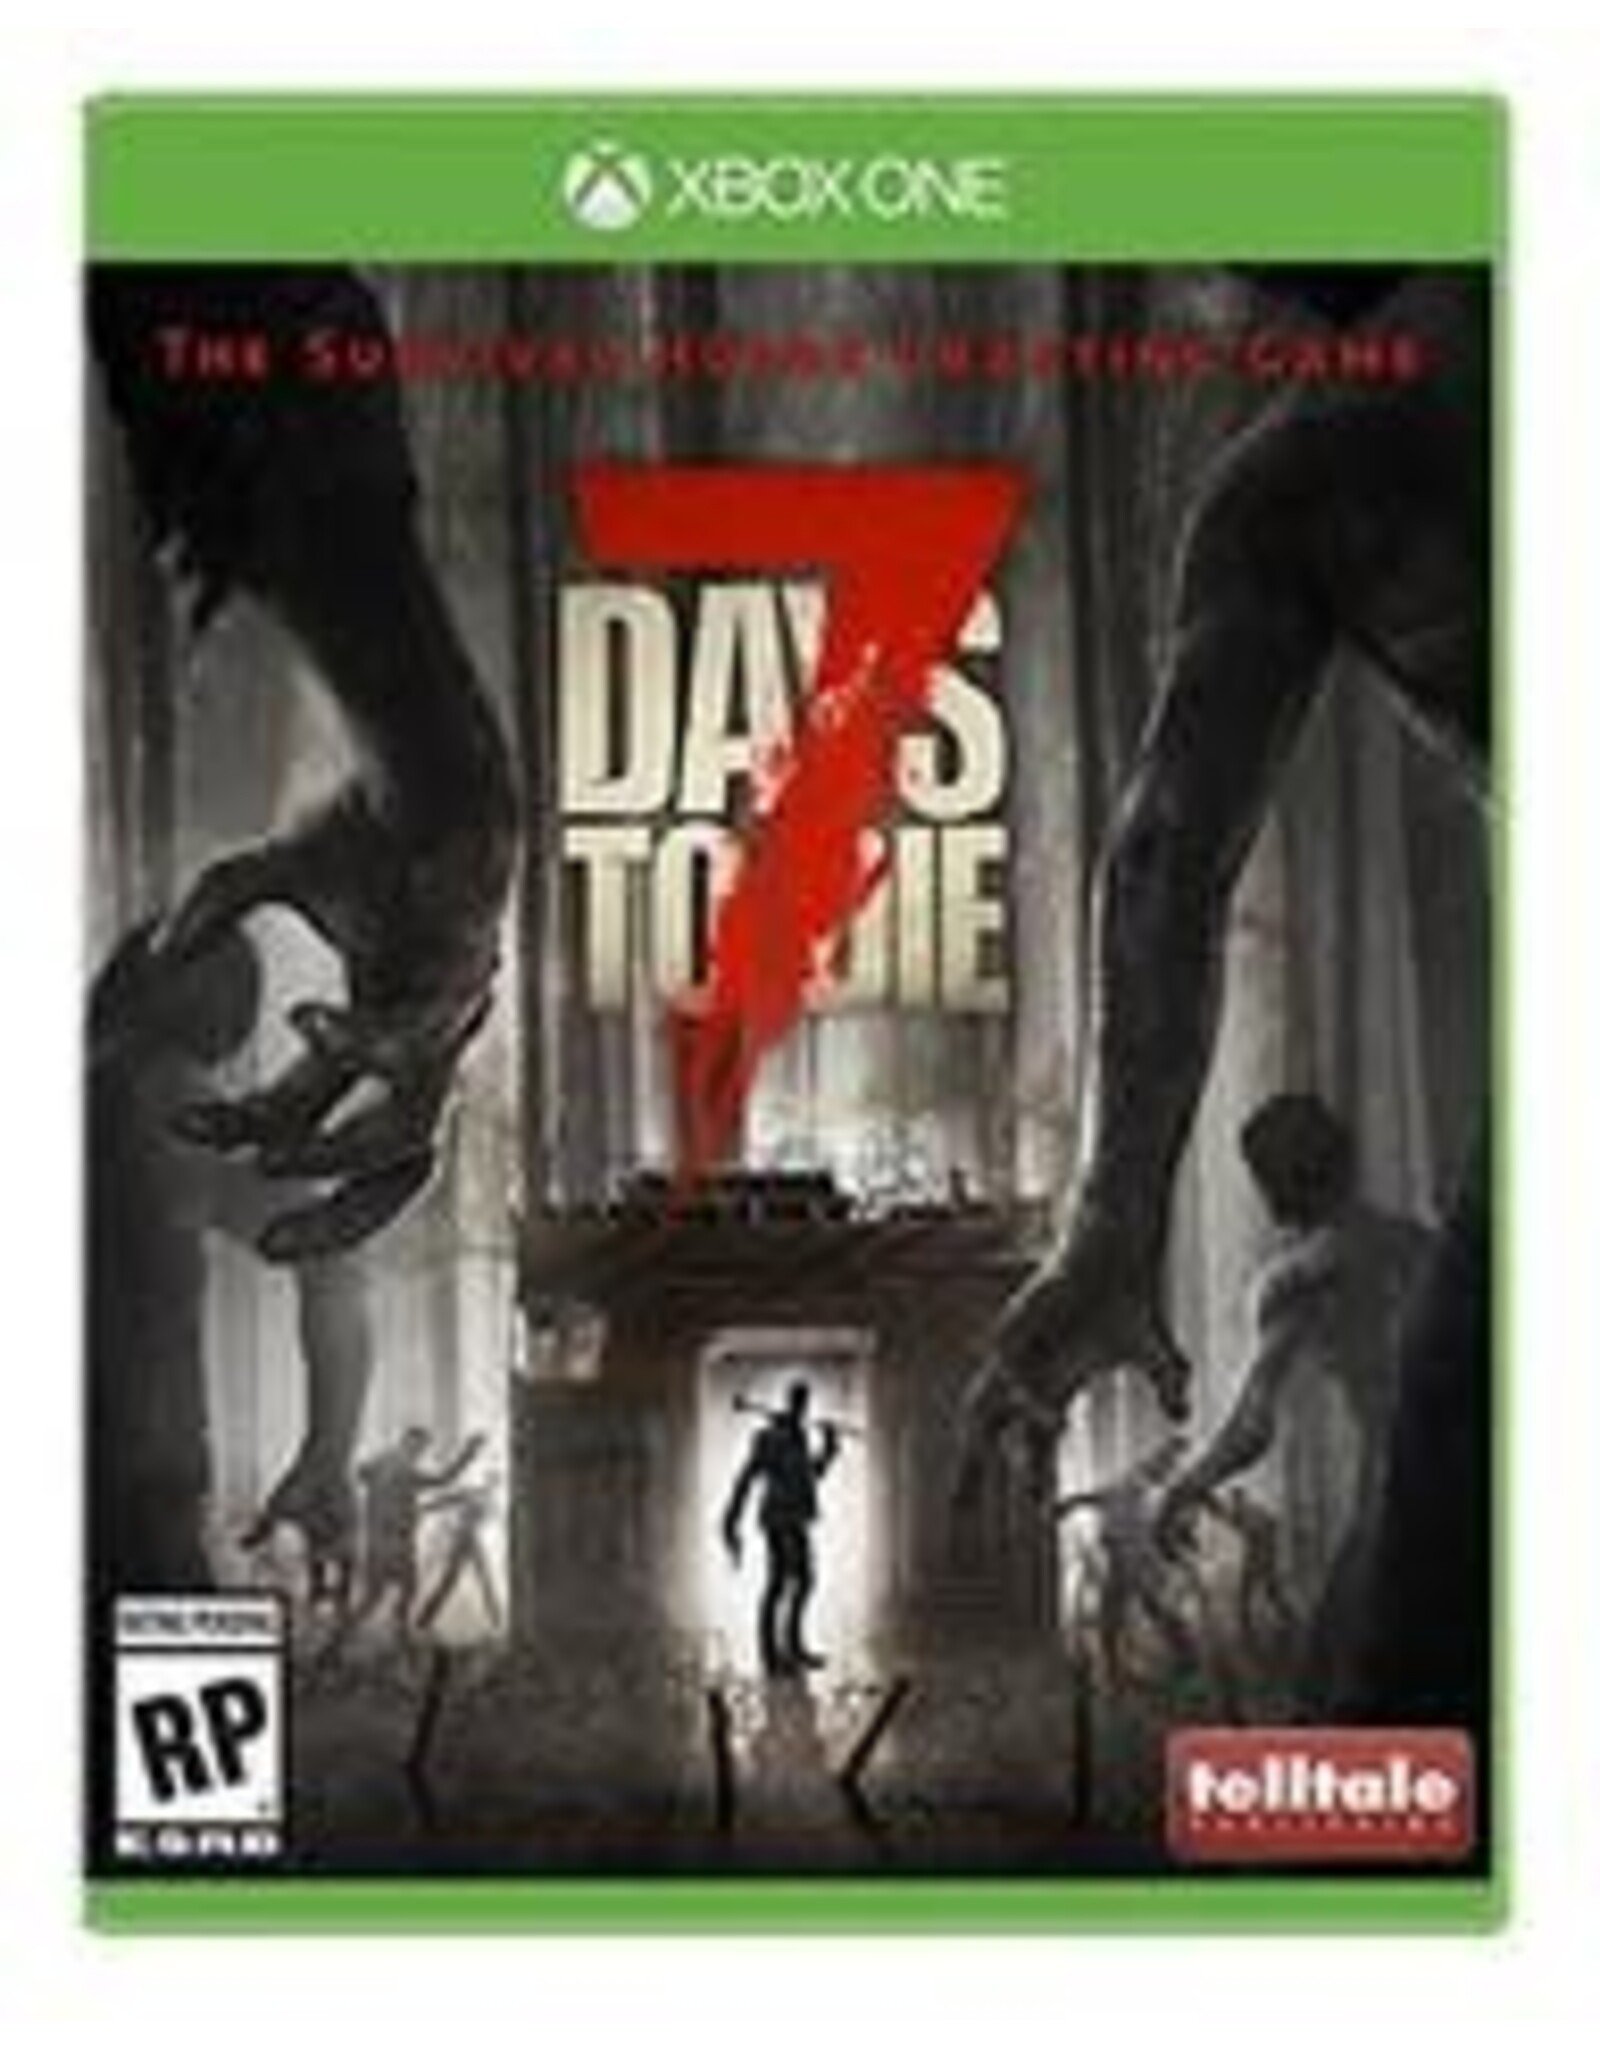 Xbox One 7 Days to Die (Used, Cosmetic Damage)